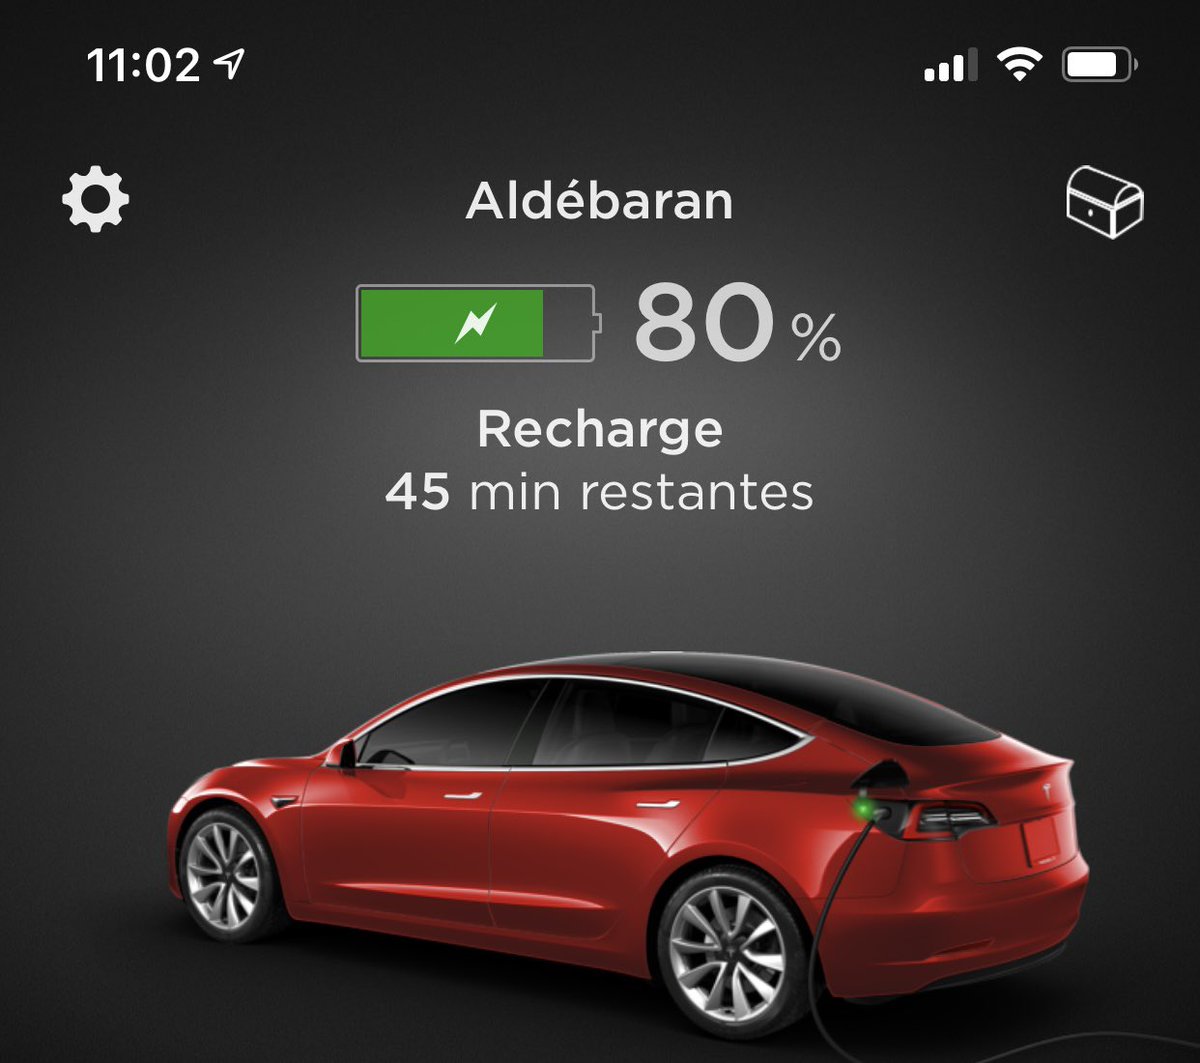  #RoadTrip today We are going to visit my wife’s family near Reims and Senlis.For the fist time we have home charging before a  #RoadTrip so Aldébaran will be ready with at least 90% charge before we leave This is nice 